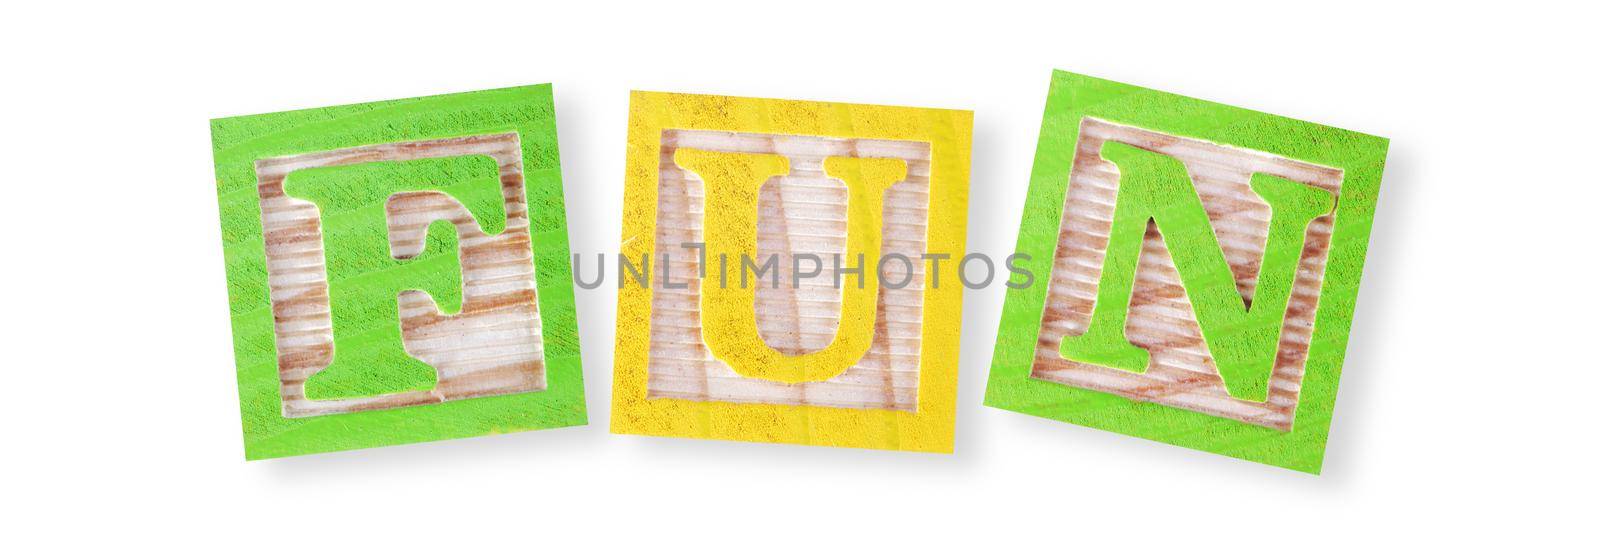 A Fun concept with childs wood blocks on white with clipping path to remove shadow